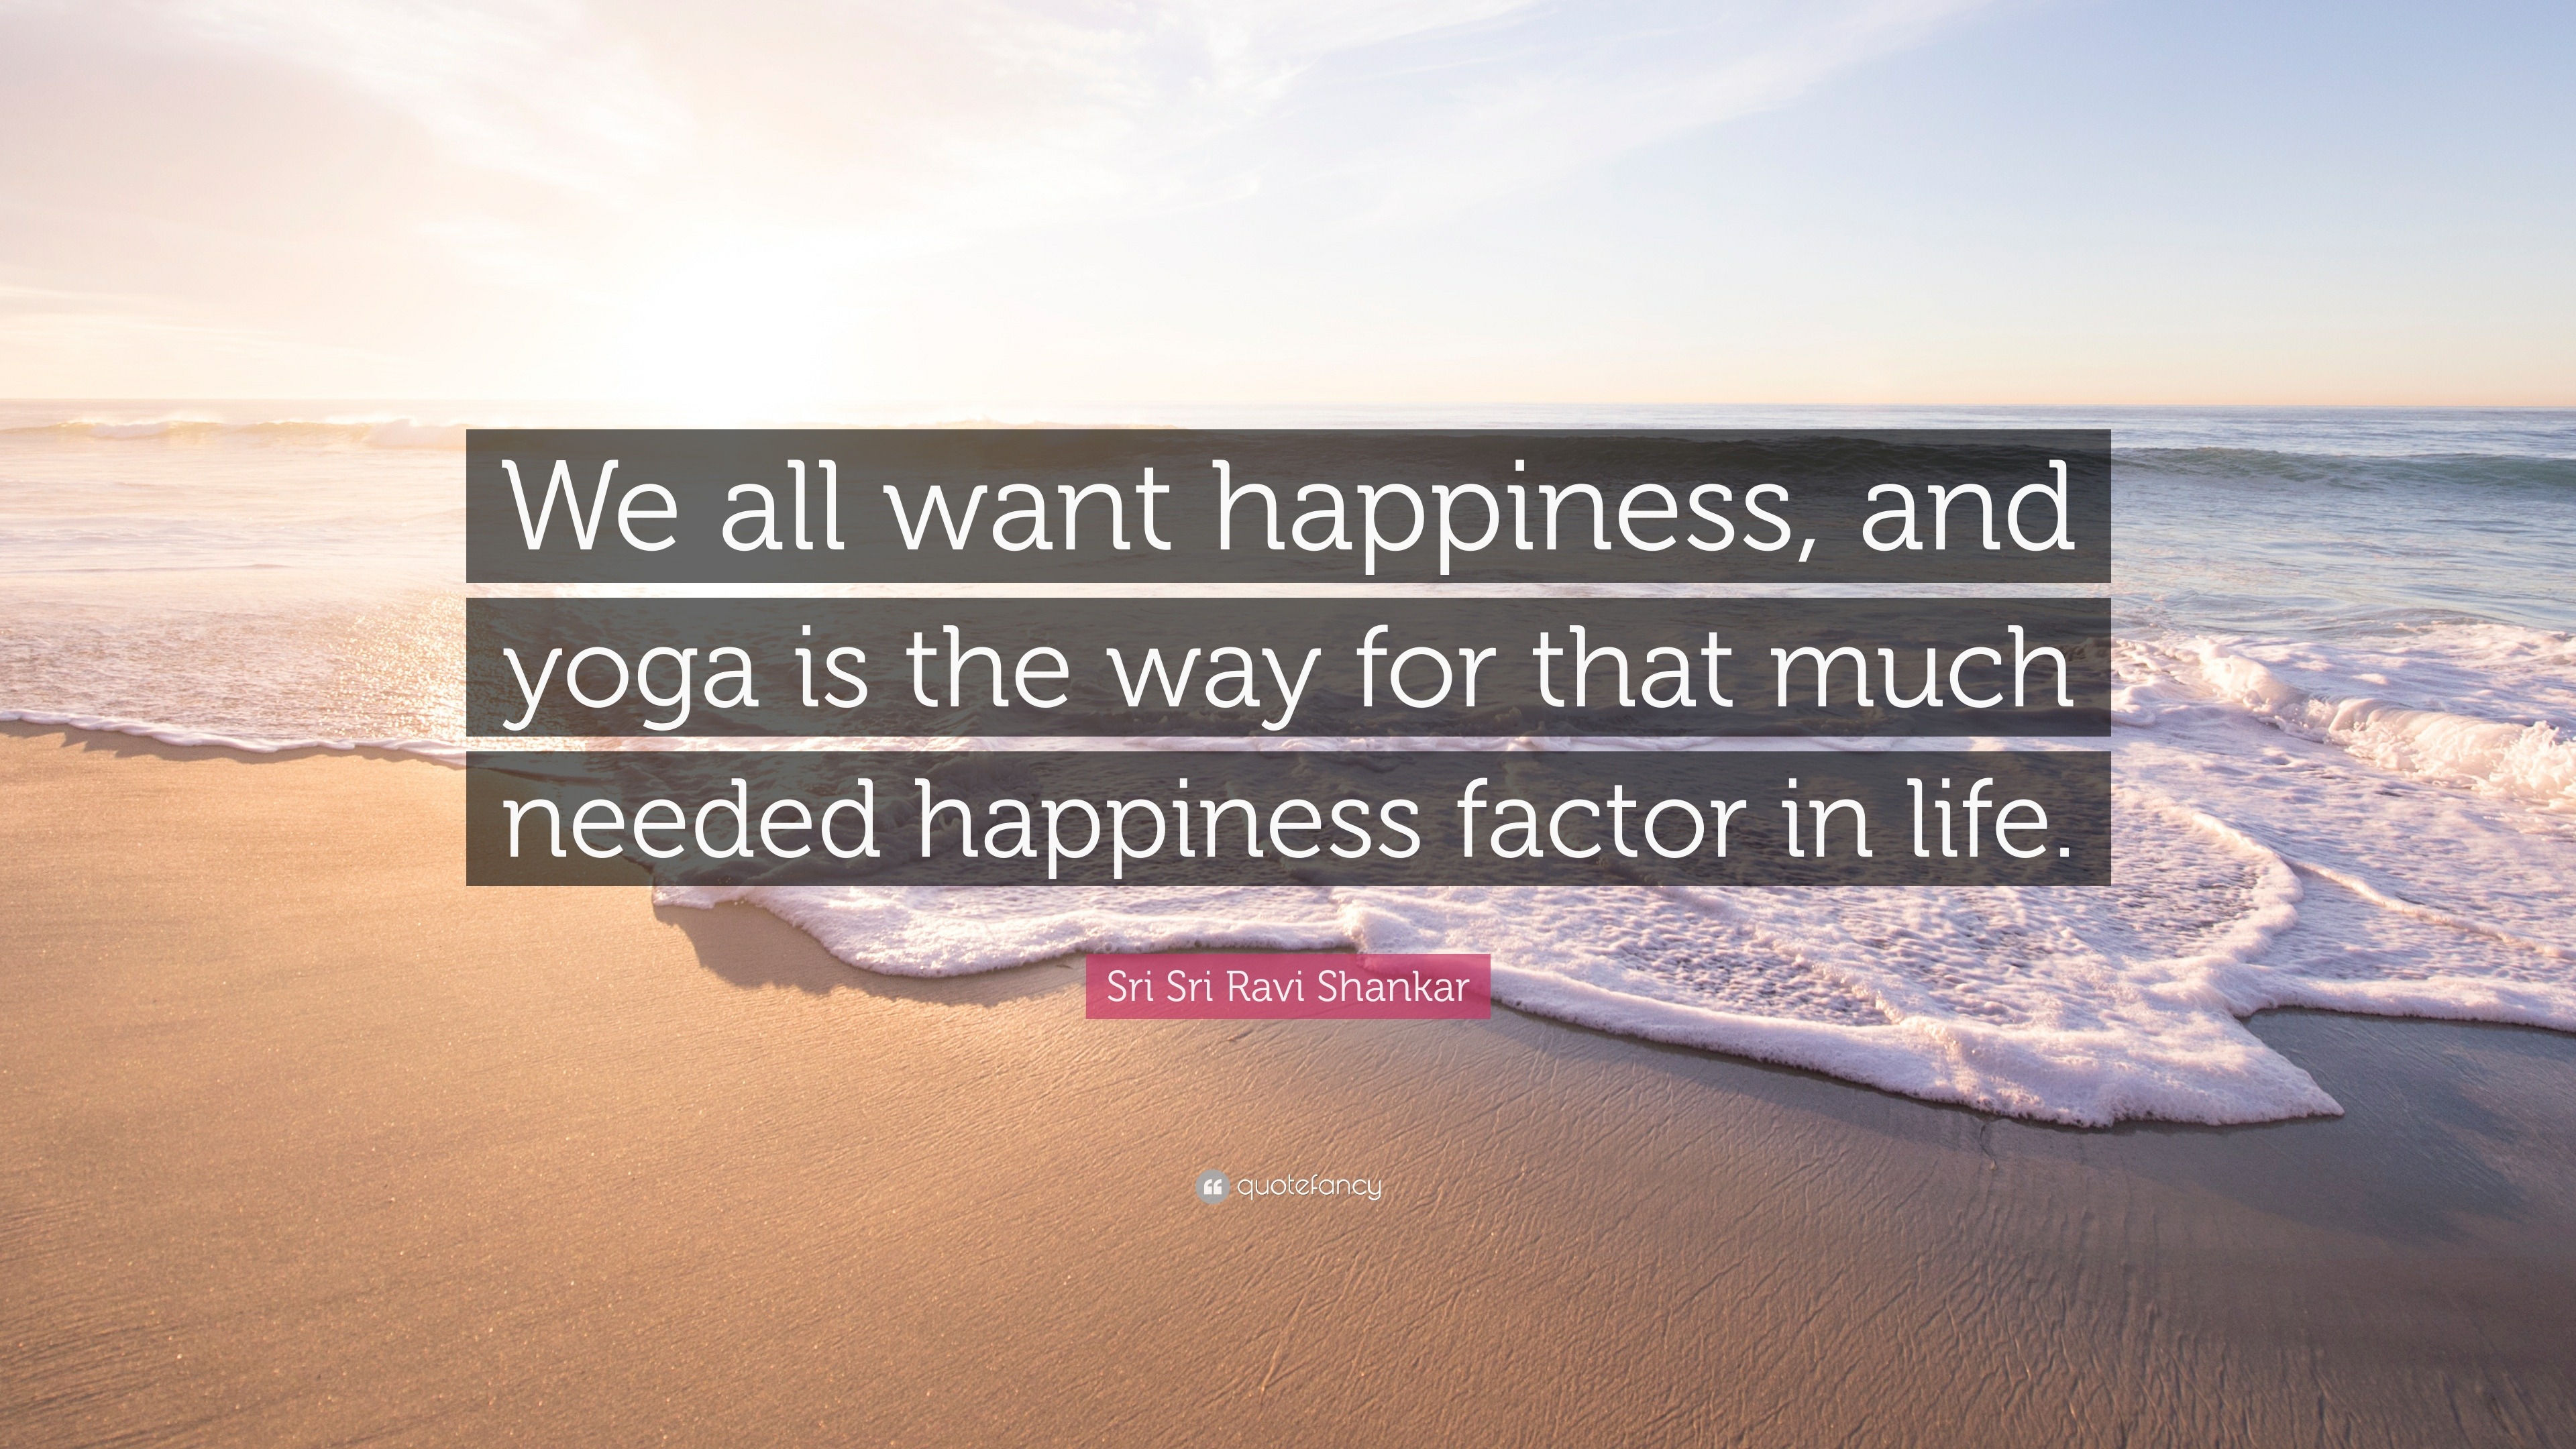 Sri Sri Ravi Shankar Quote: “We all want happiness, and yoga is the way ...